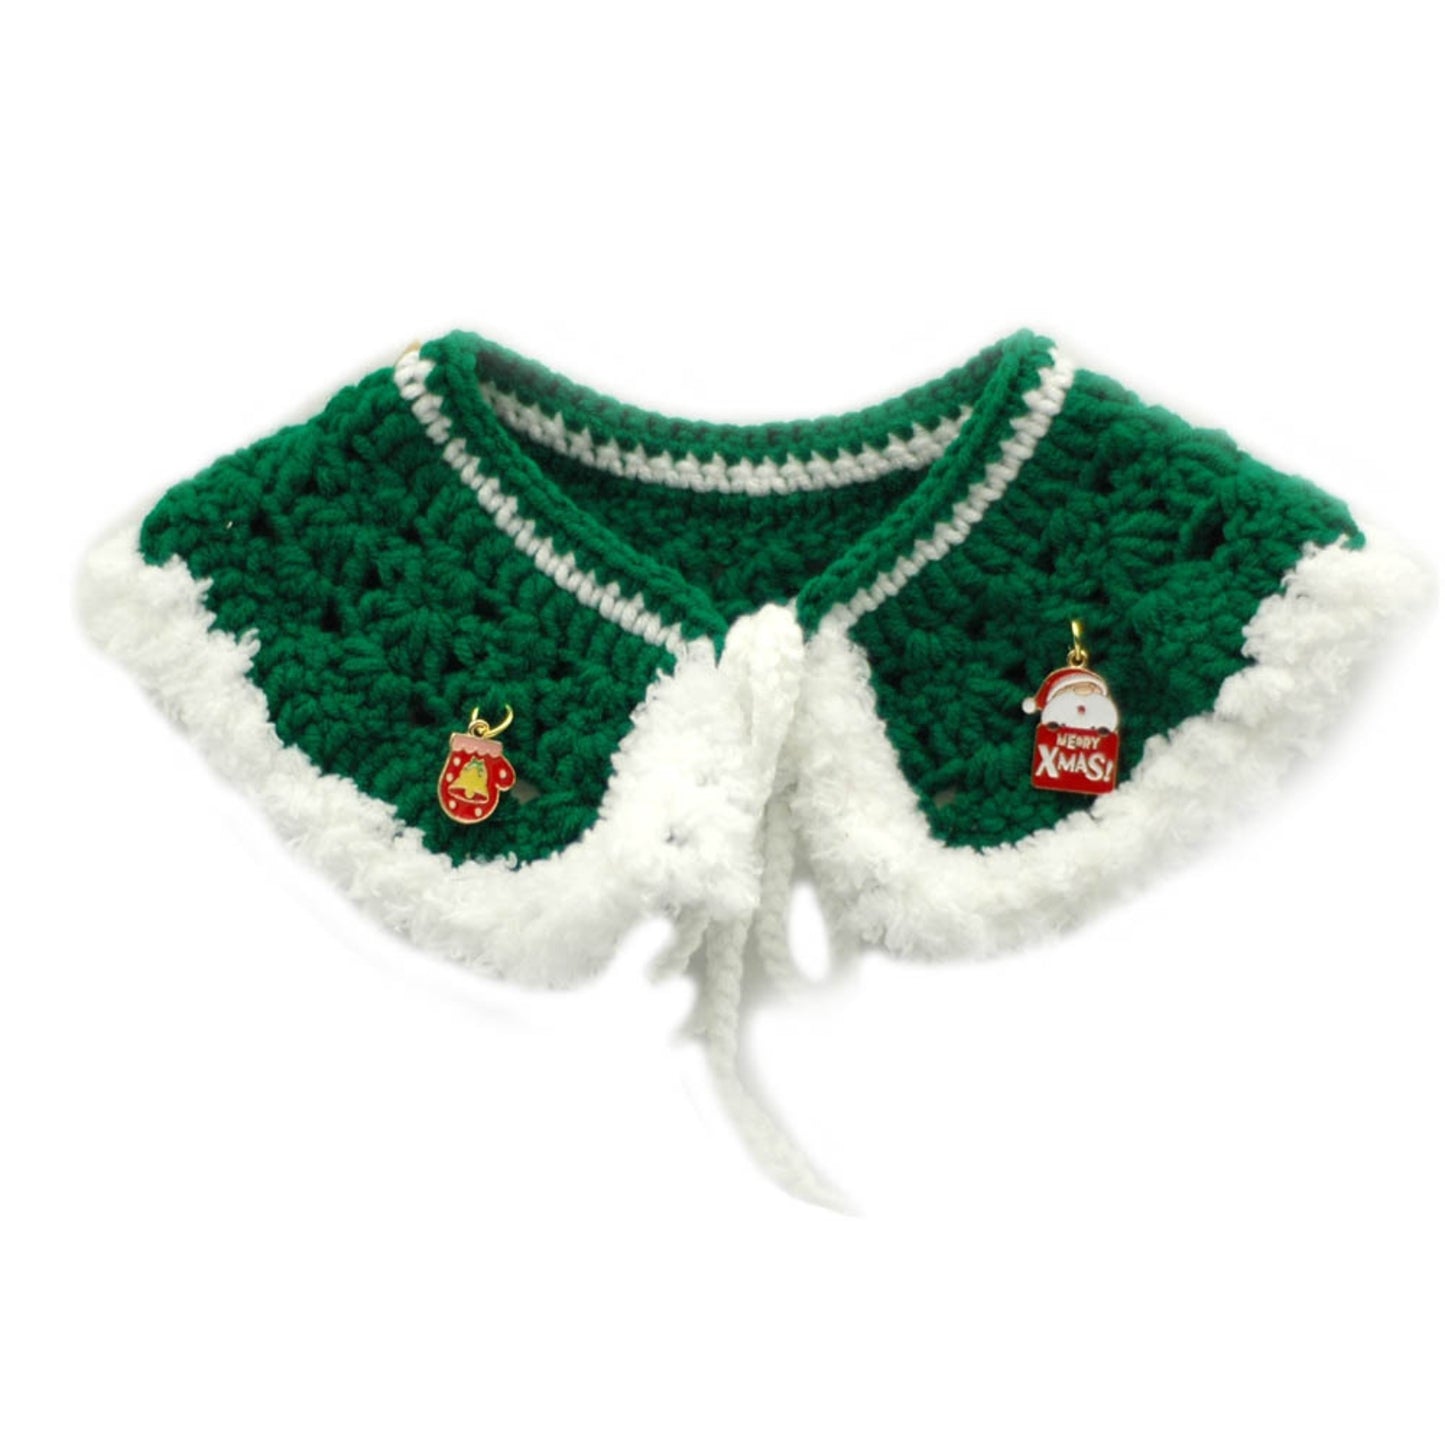 The Joy of Christmas: Hand-Knitted Pet Shawl